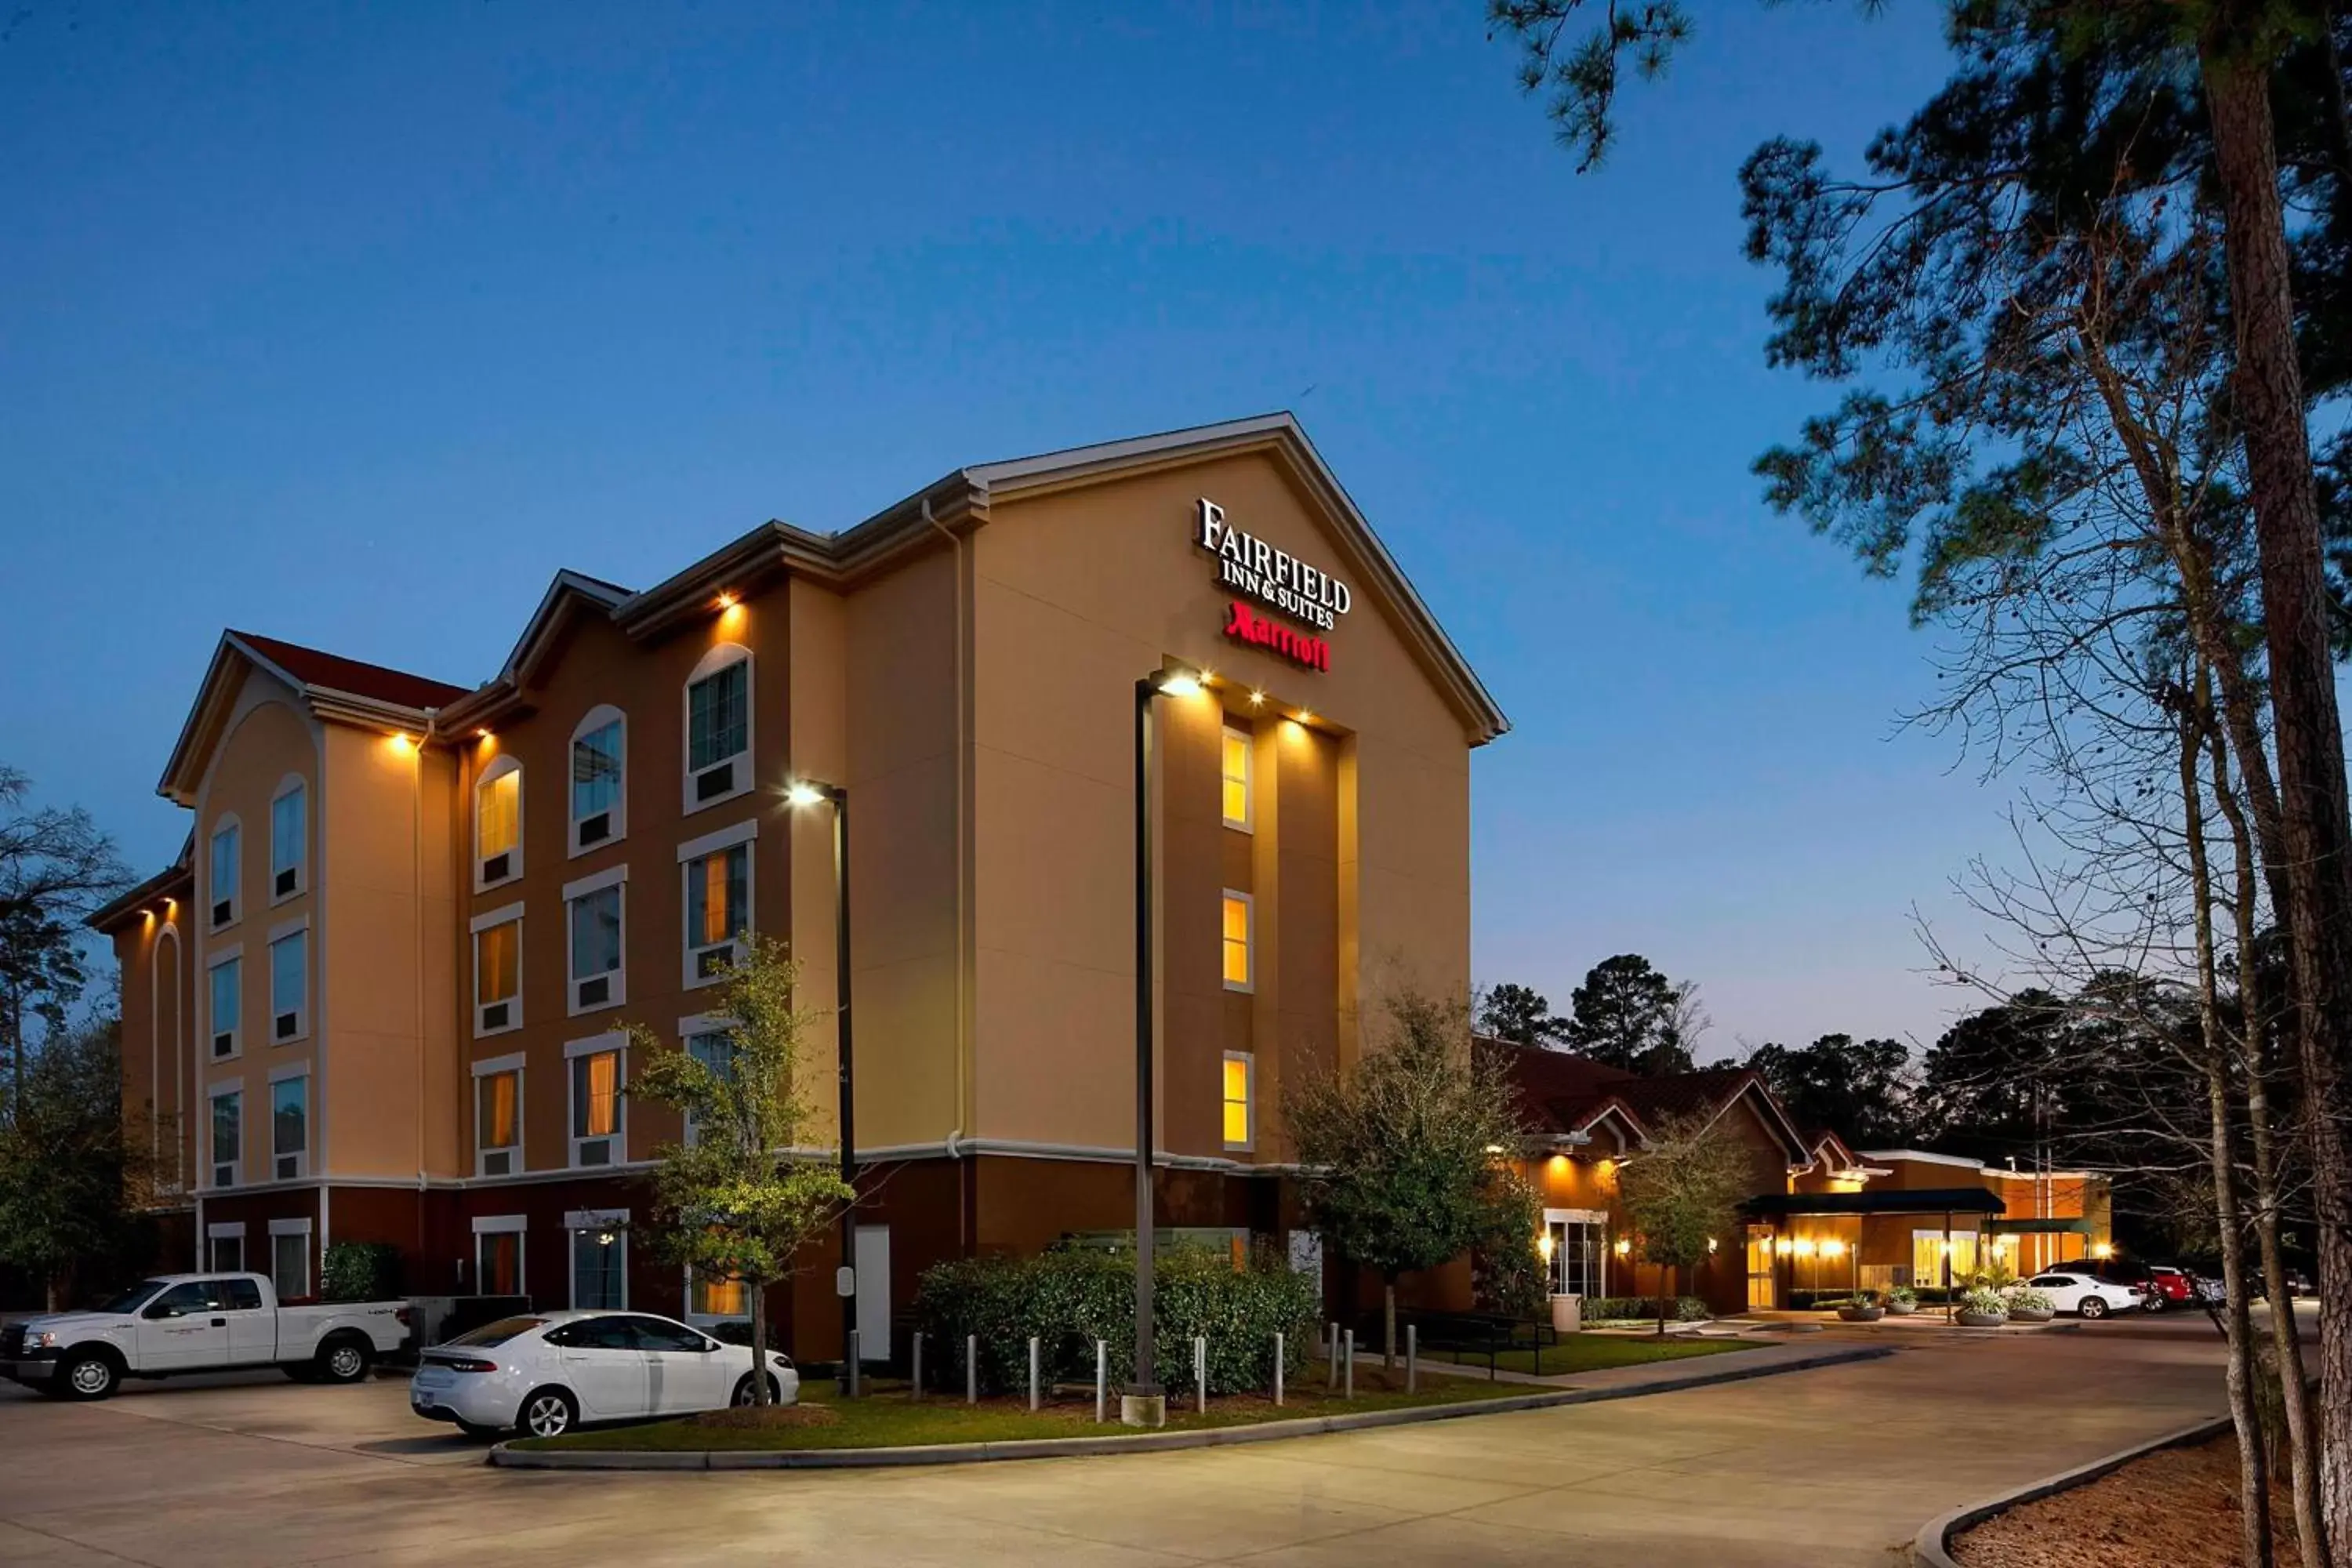 Property Building in Fairfield Inn & Suites Houston Intercontinental Airport